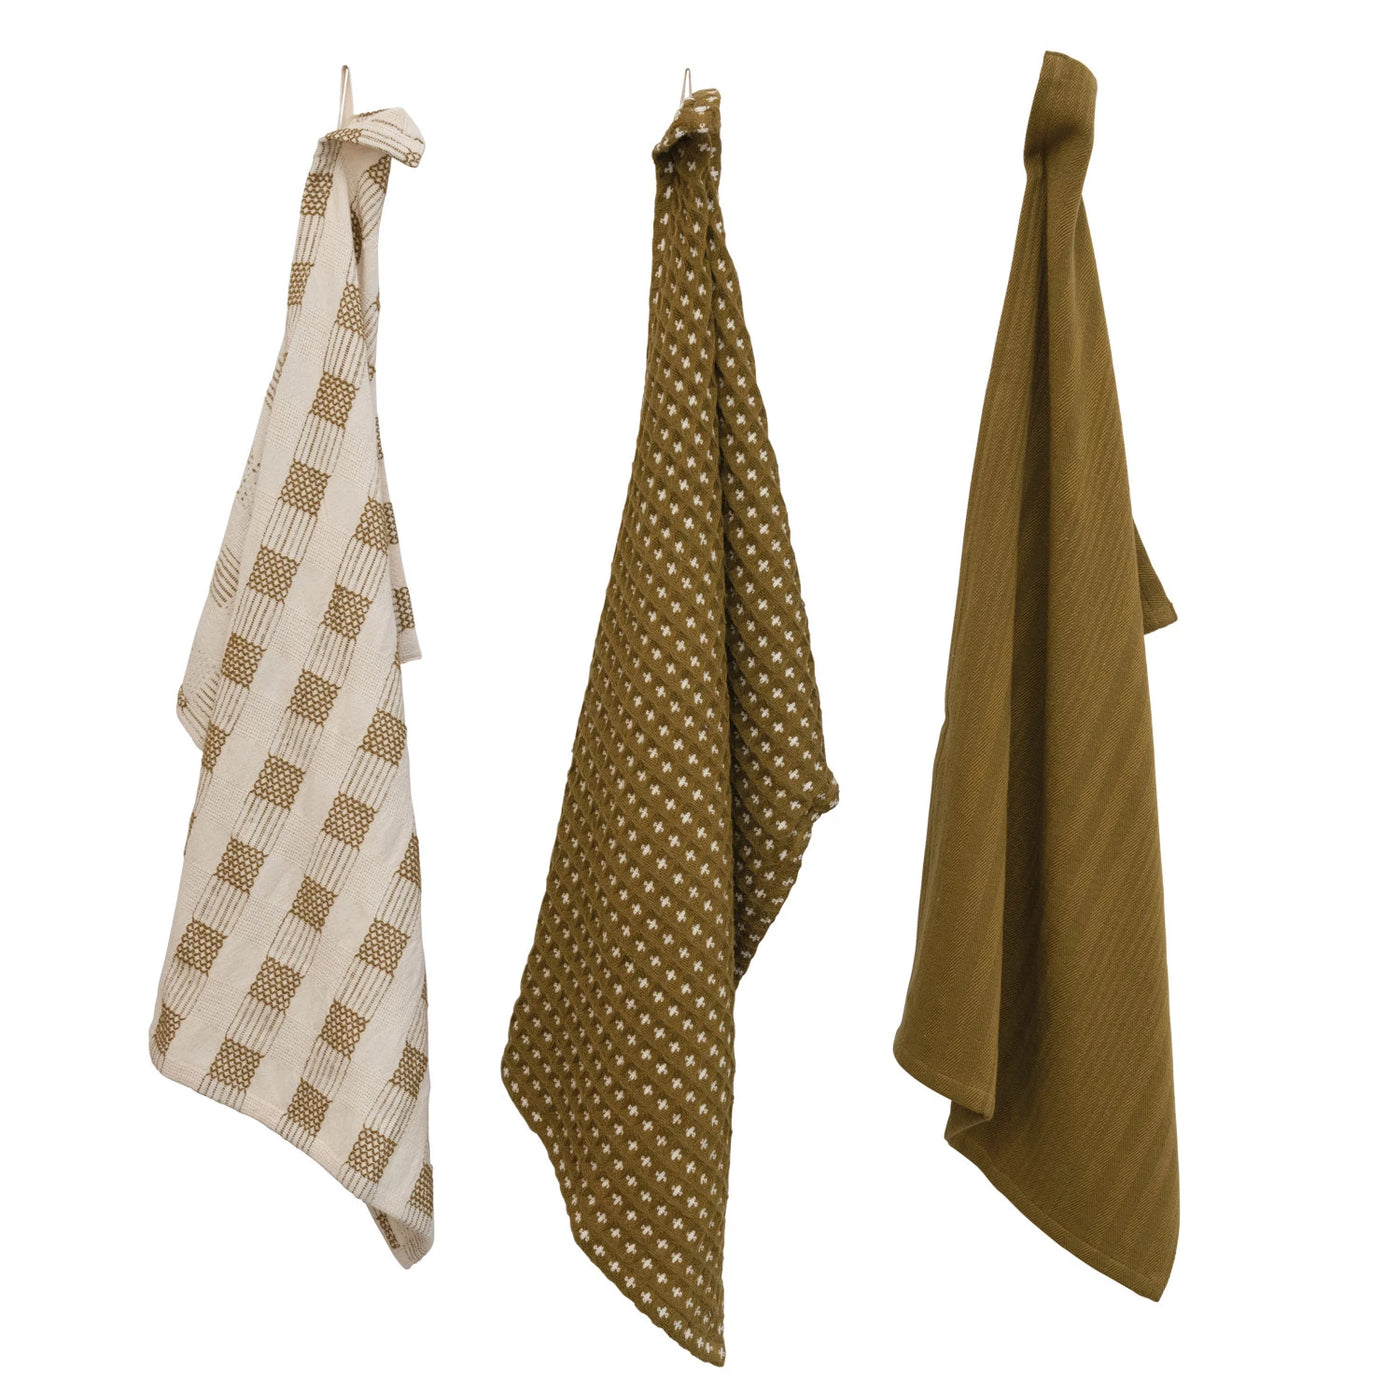 Olive Woven Cotton Cloth Set in Muslin Bag